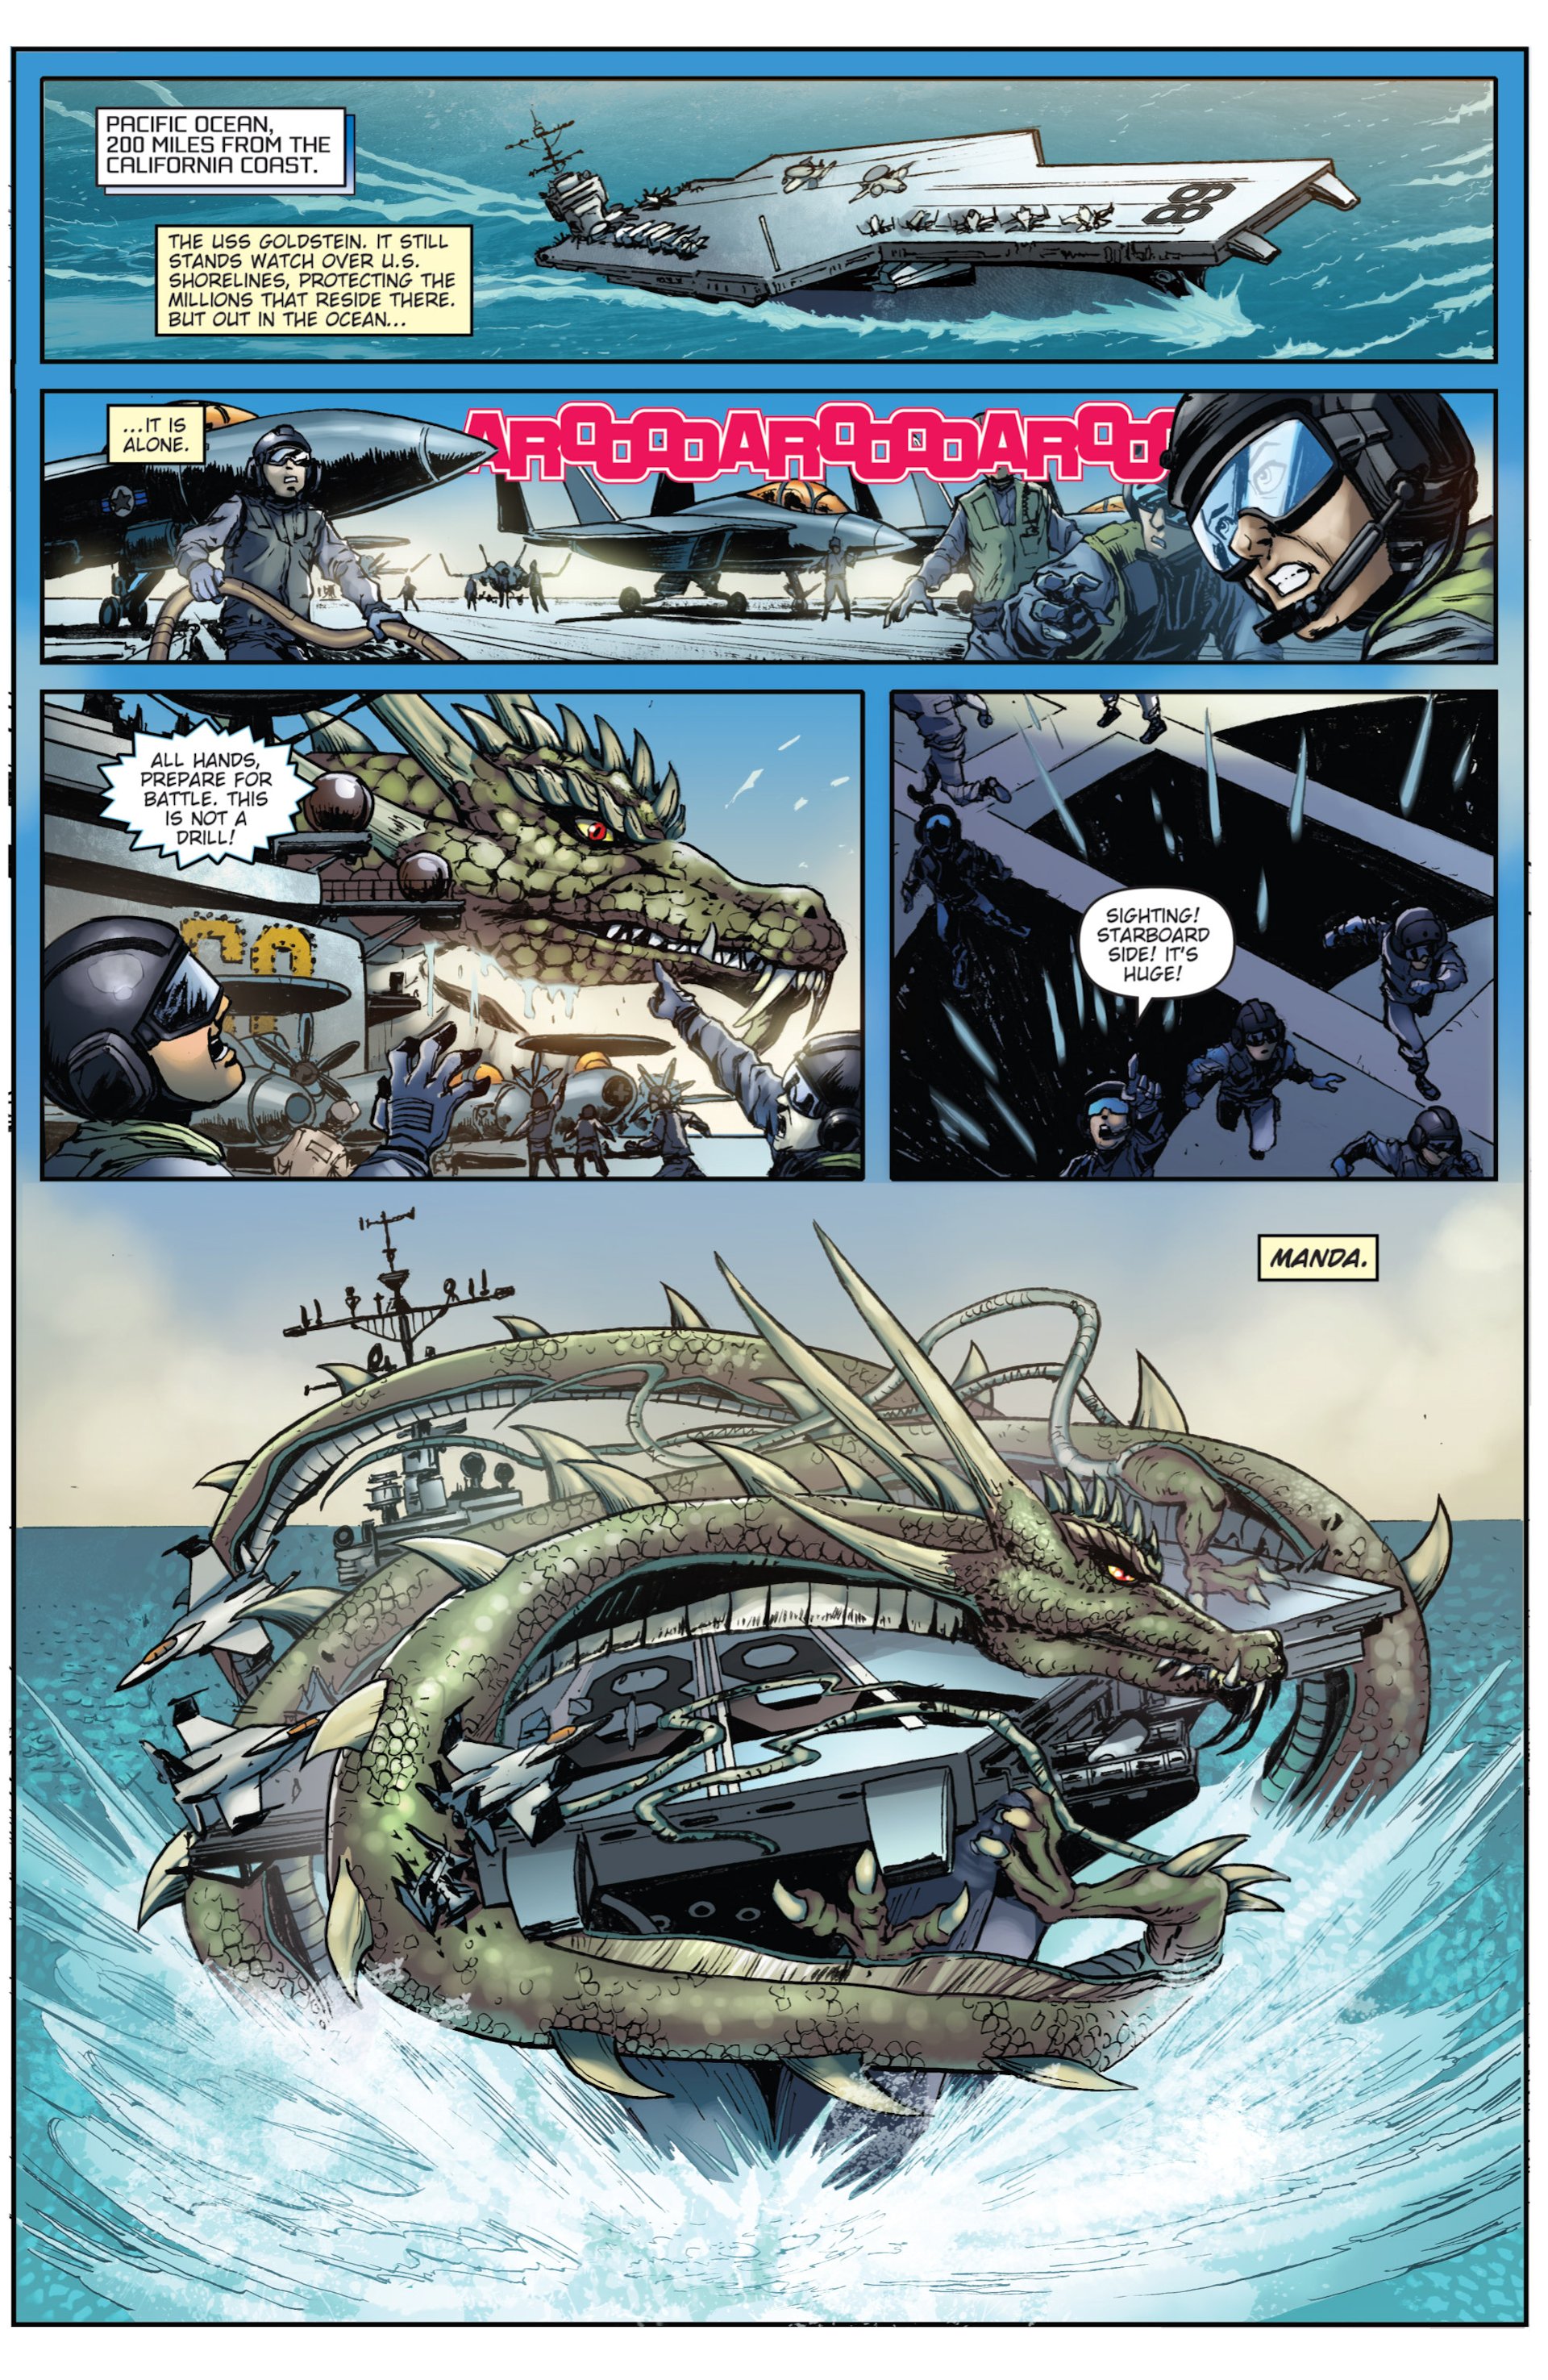 Godzilla Rulers Of Earth Issue 3 Re